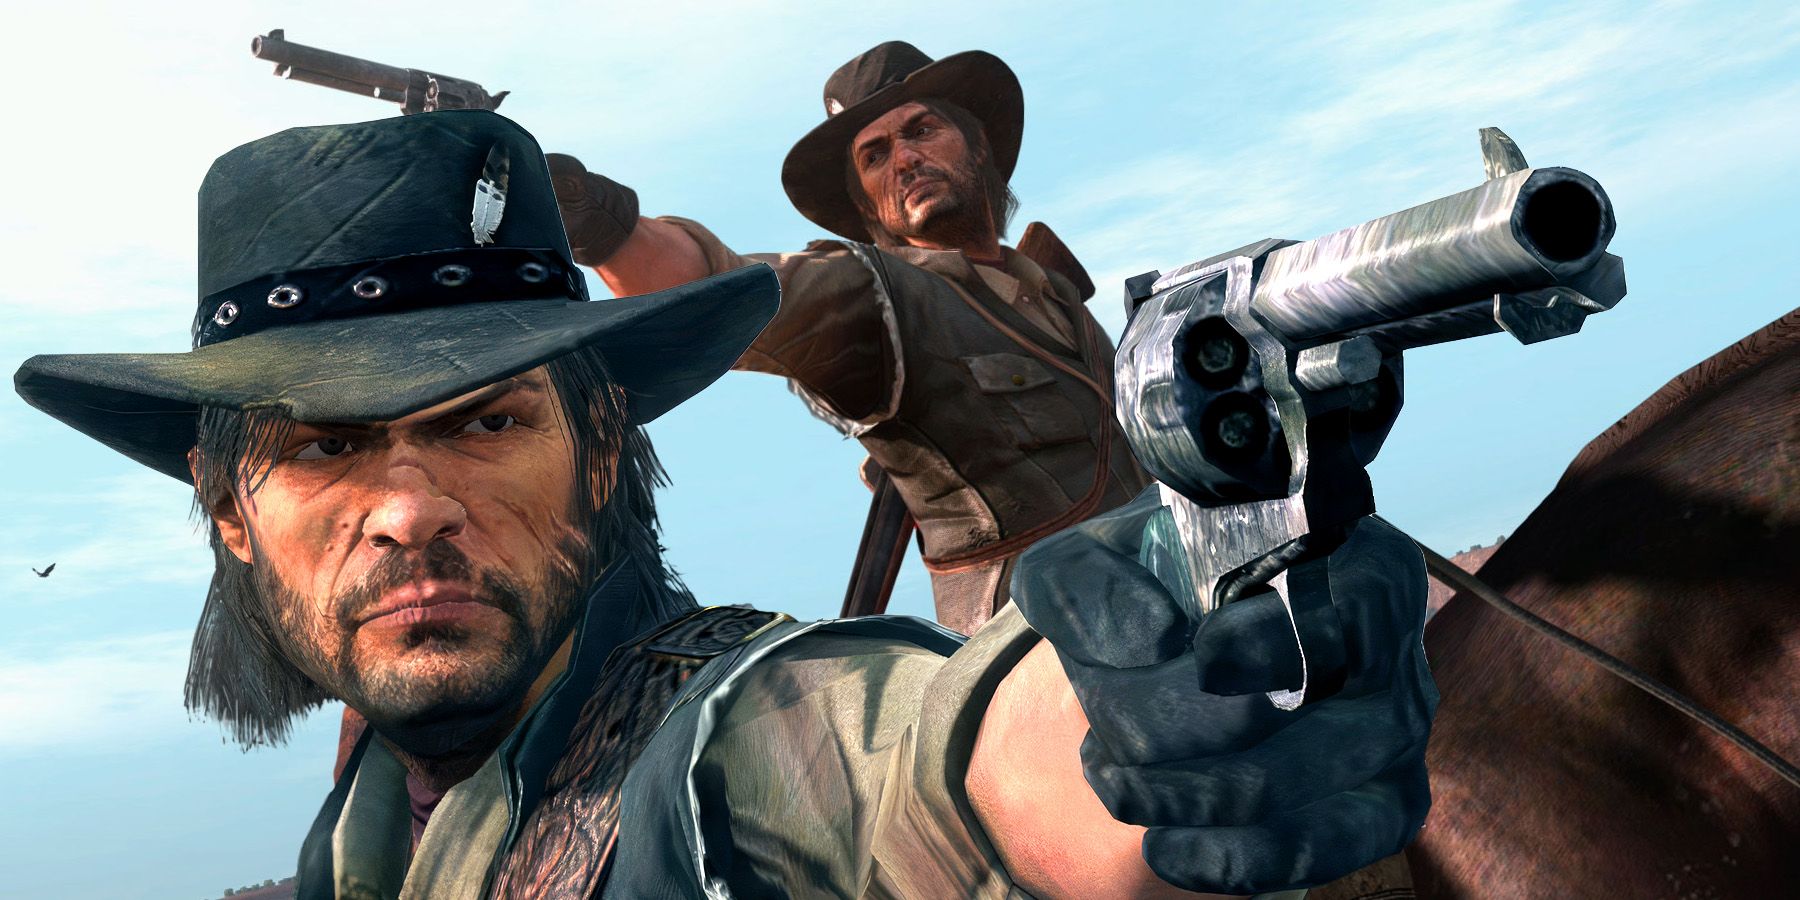 Red Dead Redemption's Switch Port: Good, But Pricey